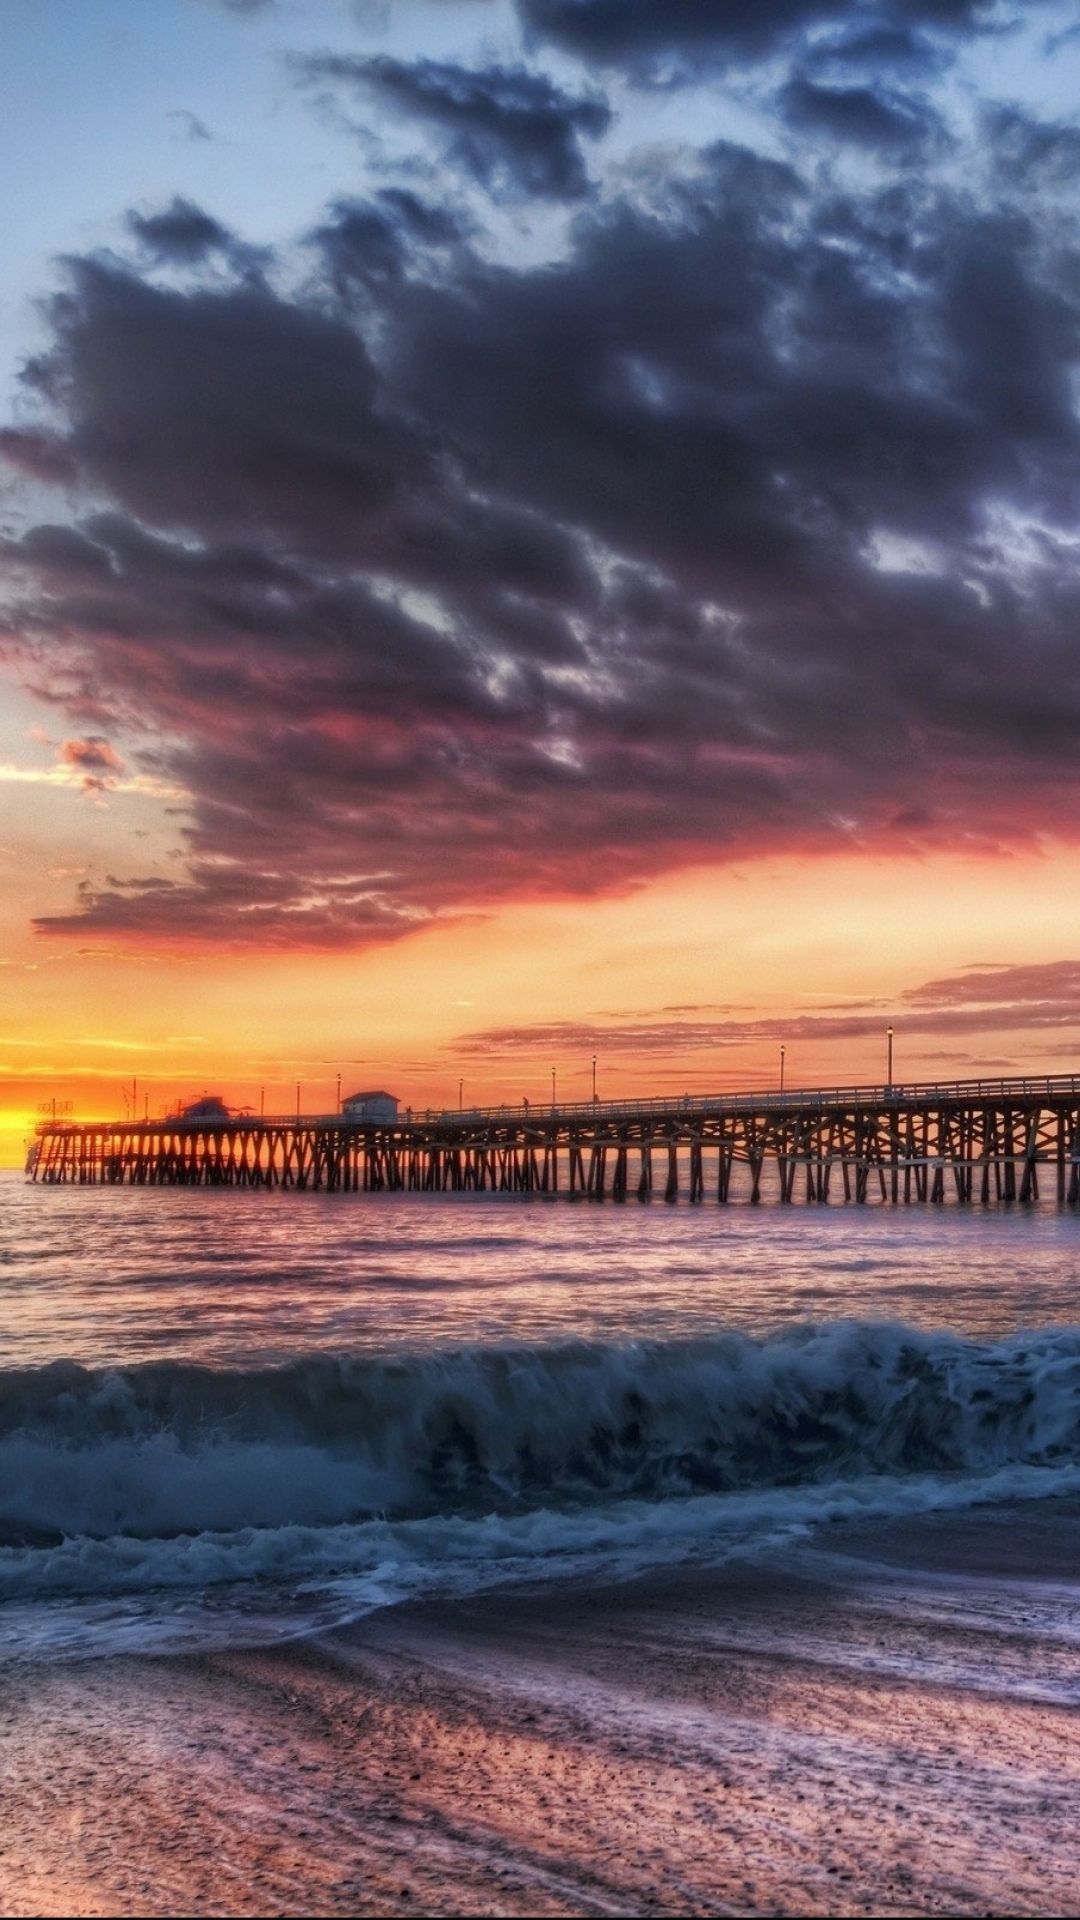 California Beach Dock Sunset | Android Wallpapers